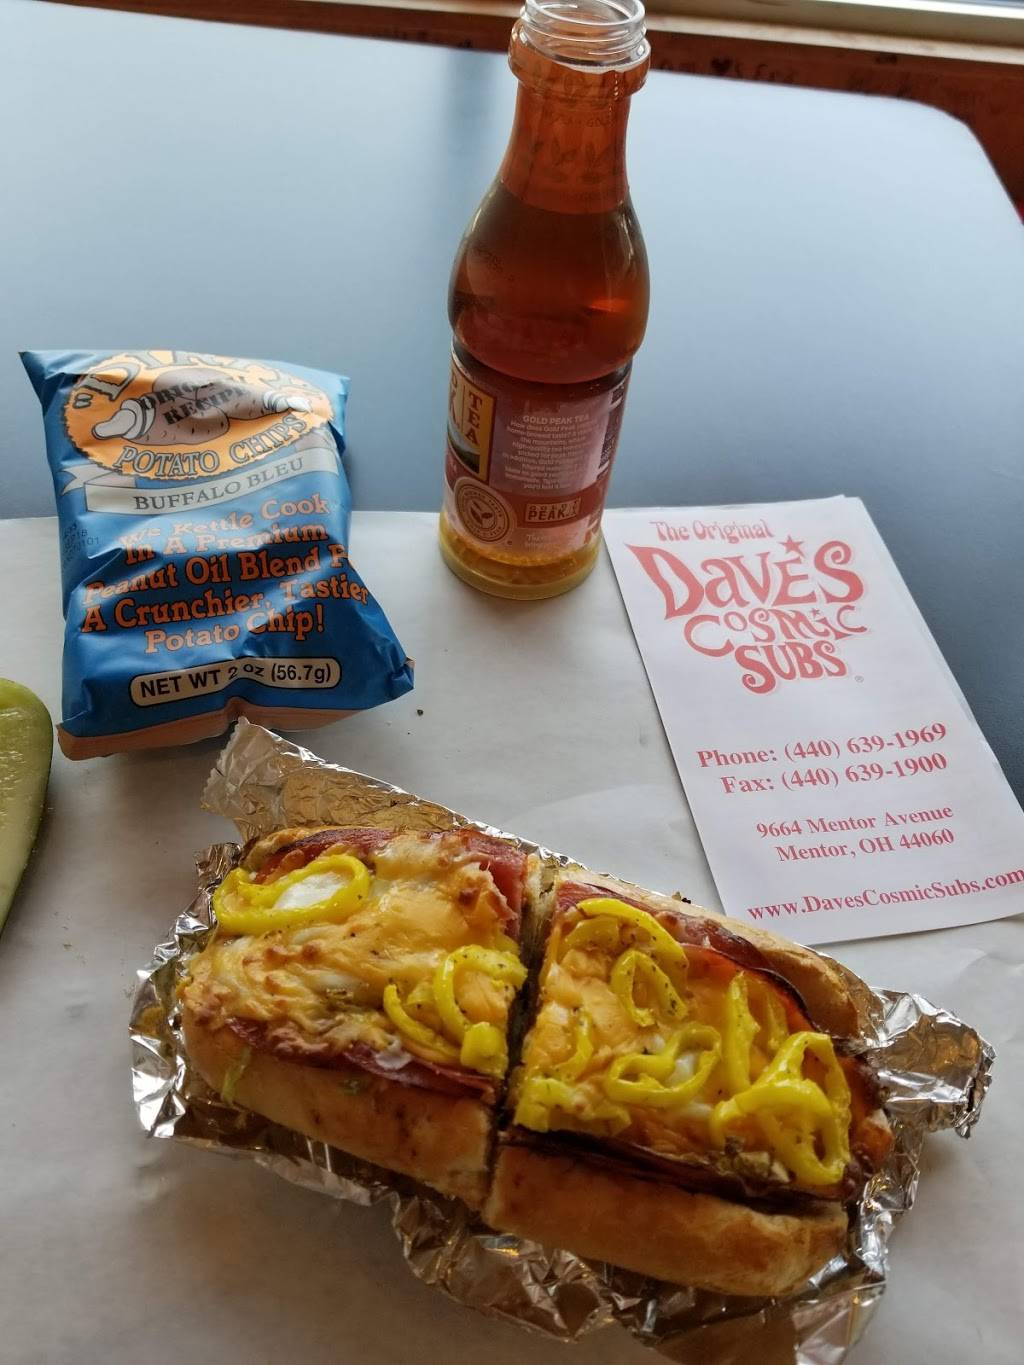 Daves Cosmic Subs | meal takeaway | 9664 Mentor Ave, Mentor, OH 44060, USA | 4406391969 OR +1 440-639-1969